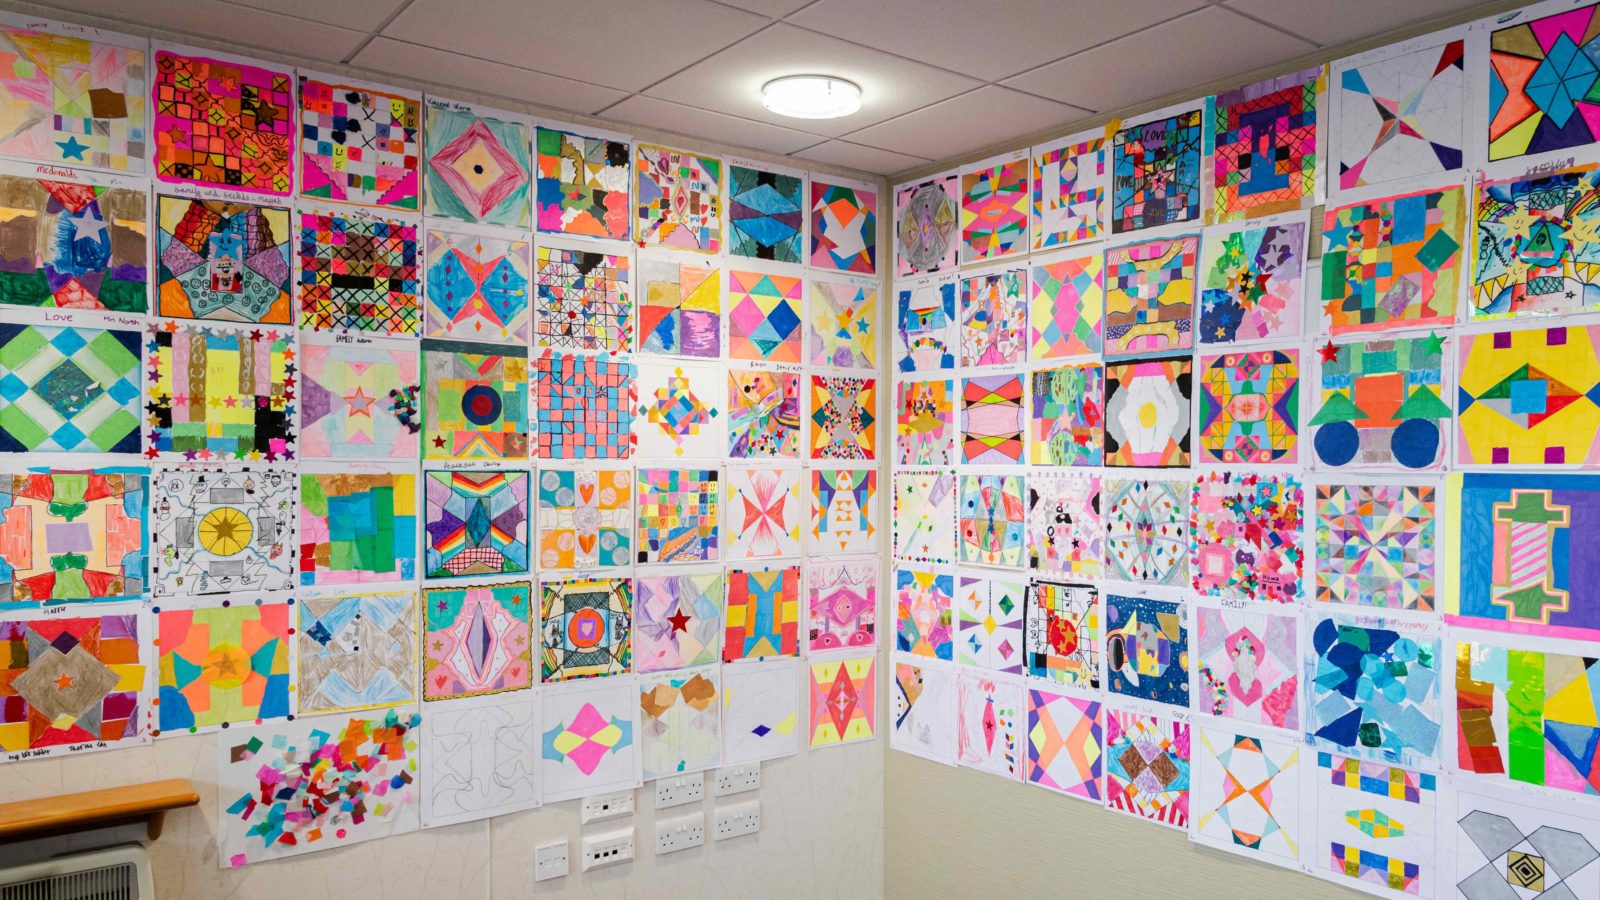 a wall full of the peace patterns that the Stockbridge community created for the mural. They are all vibrant, symmetrical patterns, some with glitter and stickers on them.